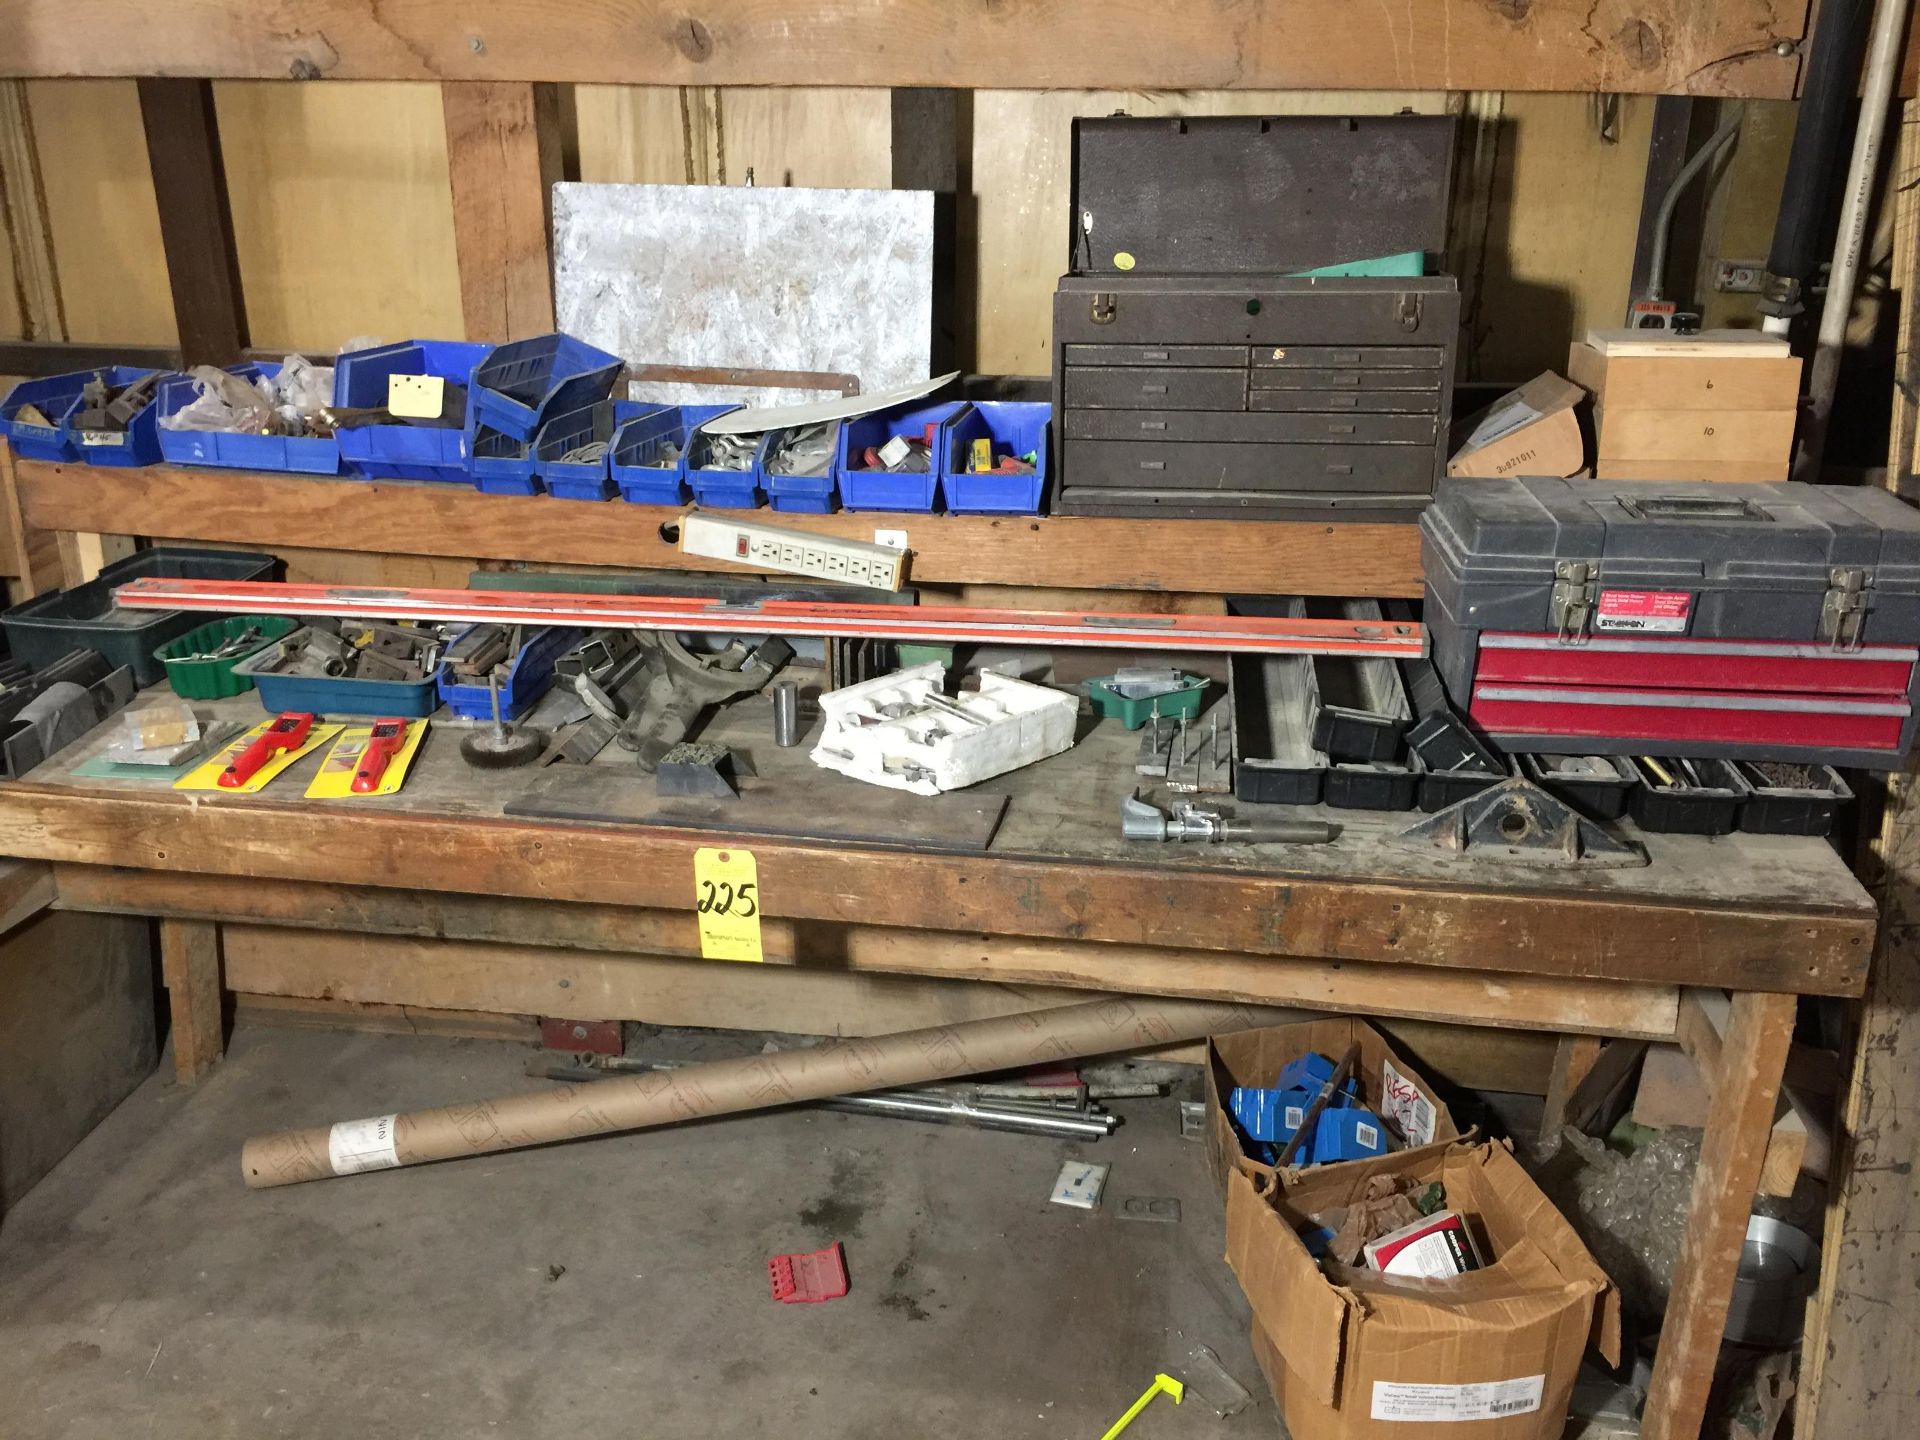 Wood Table & Contents, Tool Boxes, Angle iron, Clamps